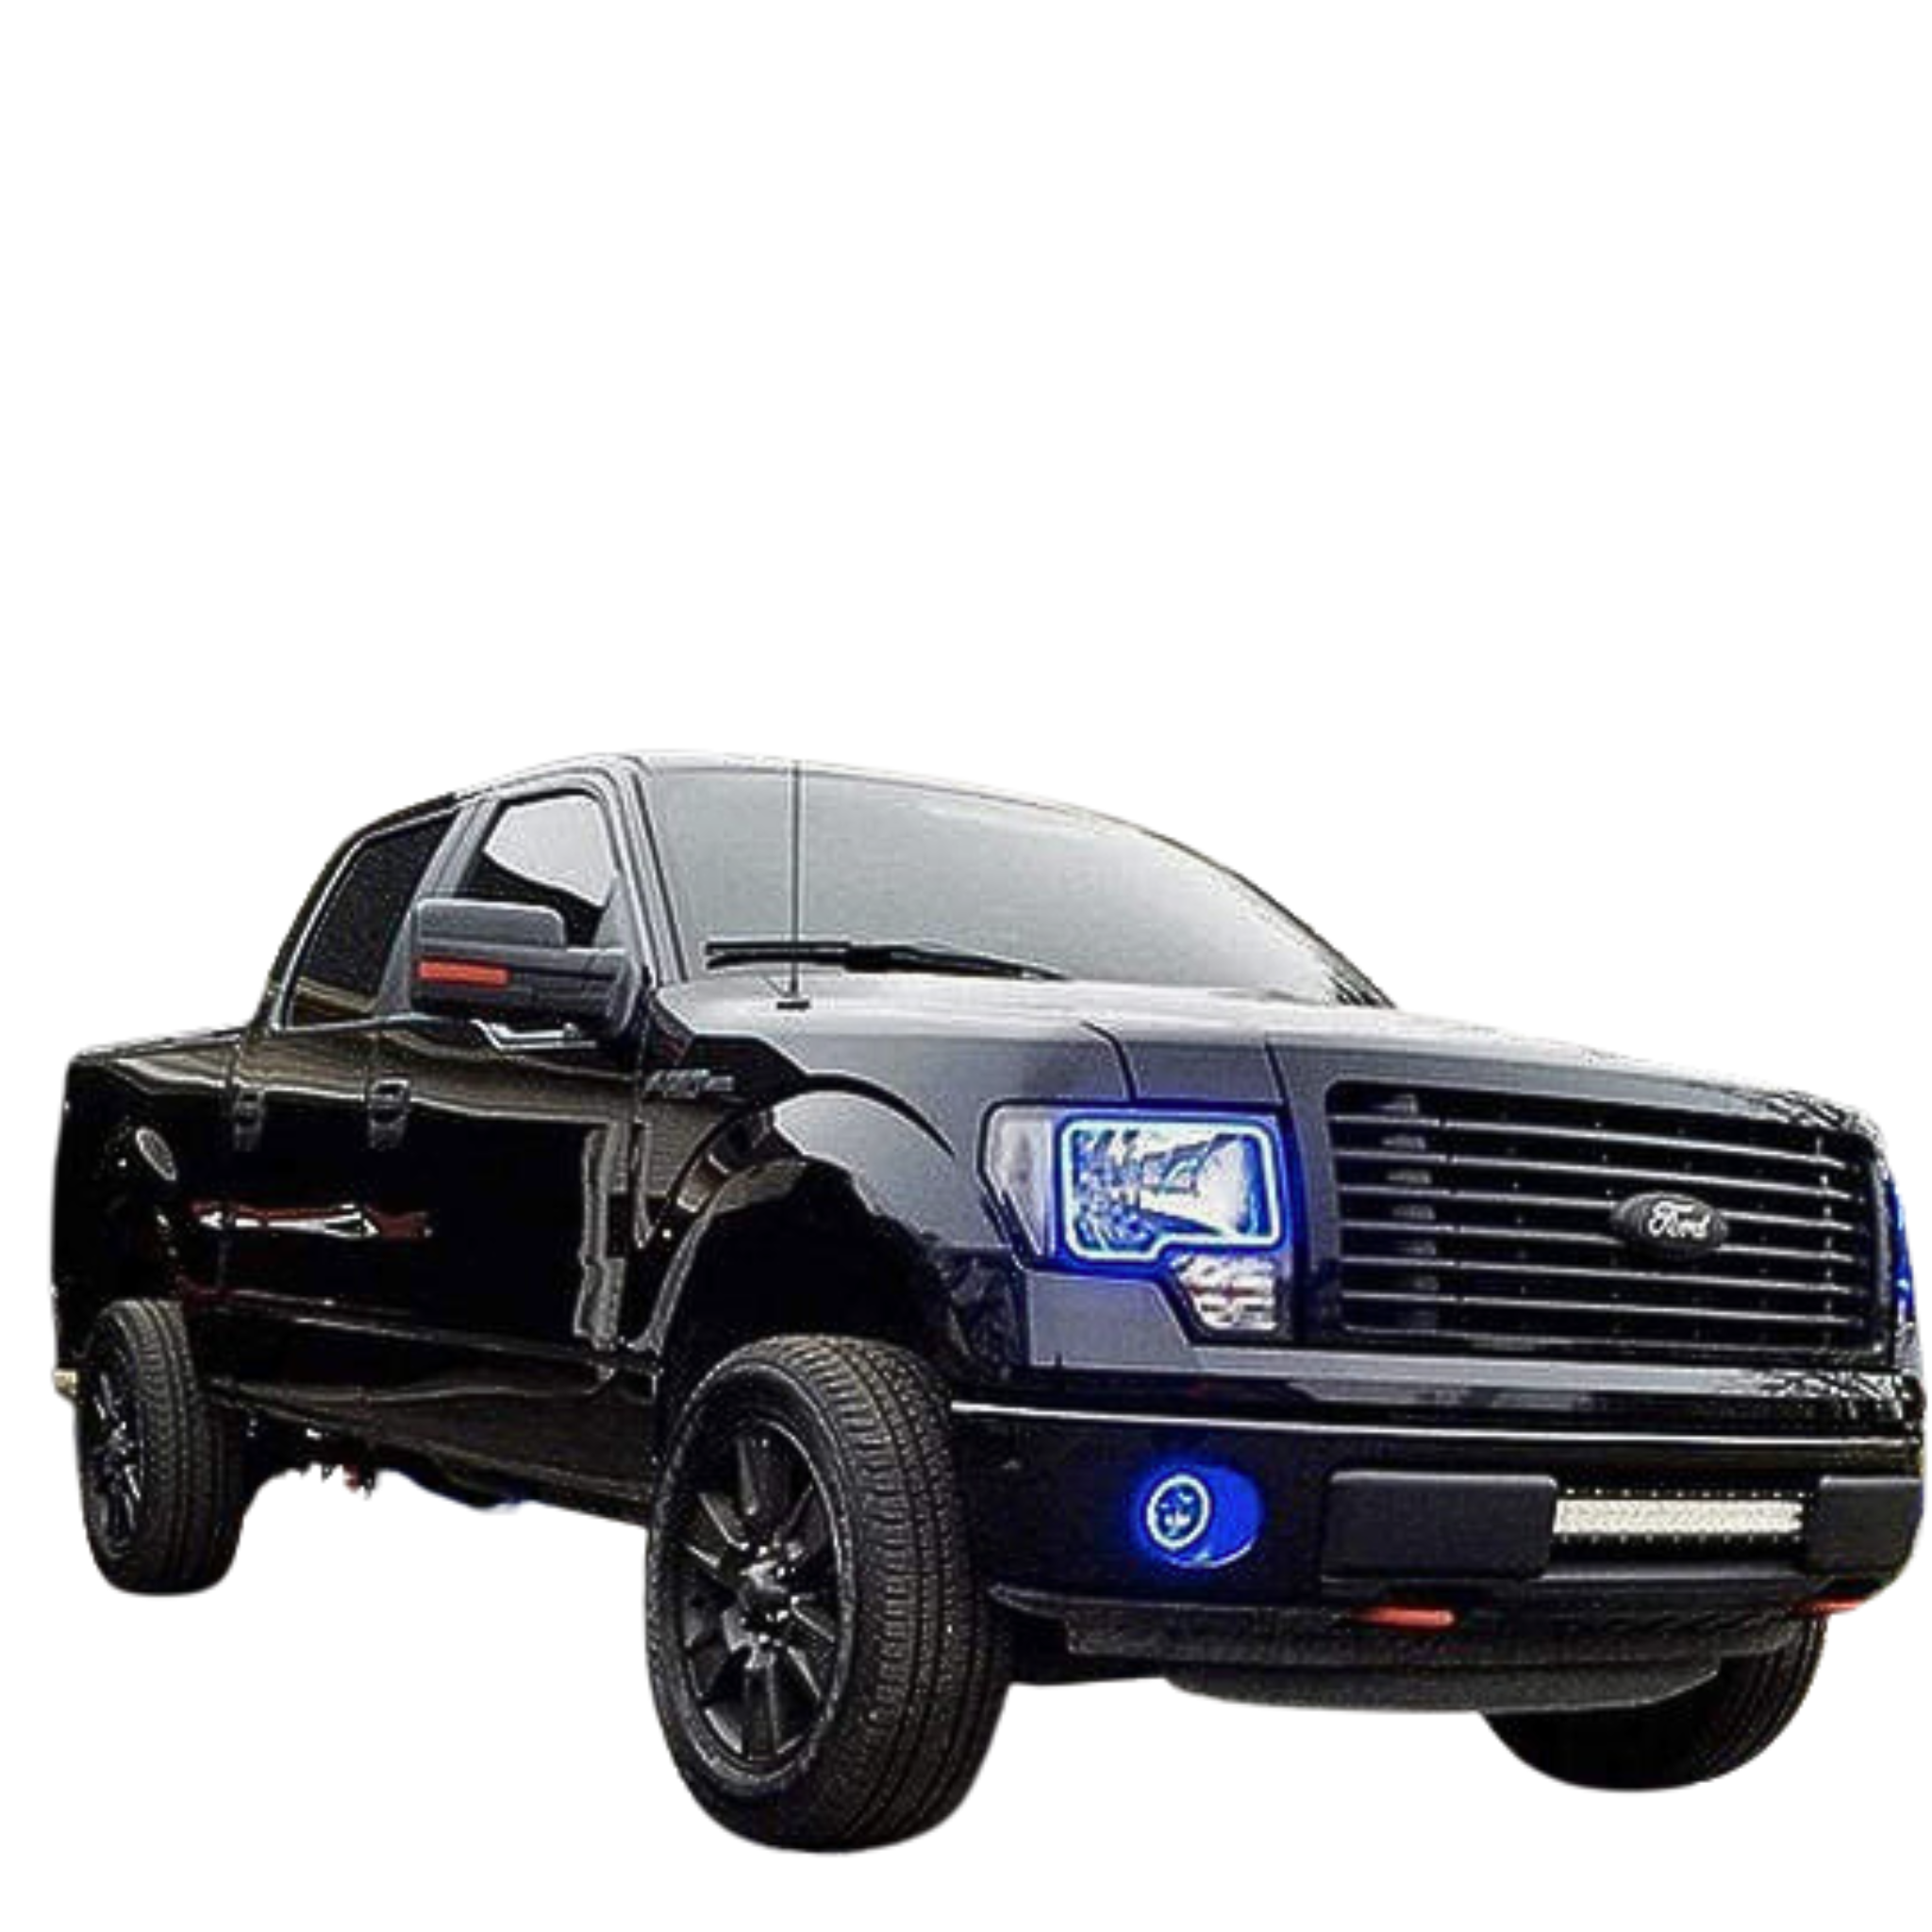 2009-2014 Ford F150 Multicolor Halo Kit - RGB Halo Kits Multicolor Flow Series Color Chasing RGBWA LED headlight kit Oracle Lighting Trendz OneUpLighting Morimoto theretrofitsource AutoLEDTech Diode Dynamics